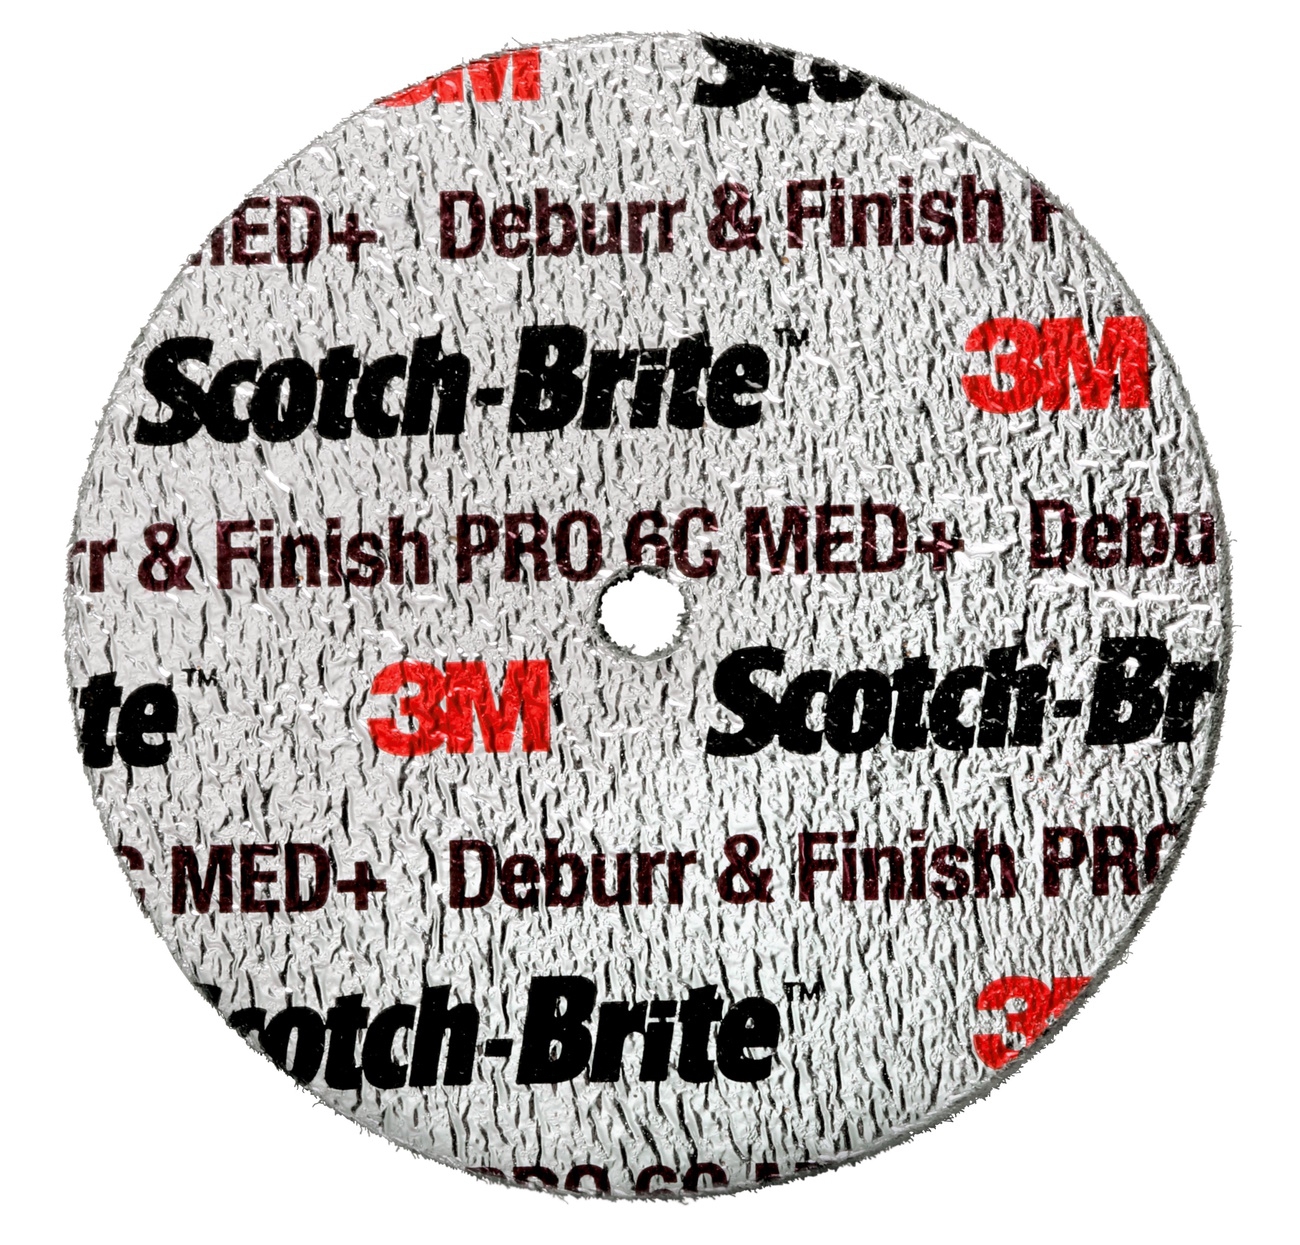  3M Scotch-Brite Deburr and Finish PRO -kompaktlevy DP-UW, 75 mm x 12,7 mm x 6,35 mm, 4C MED +